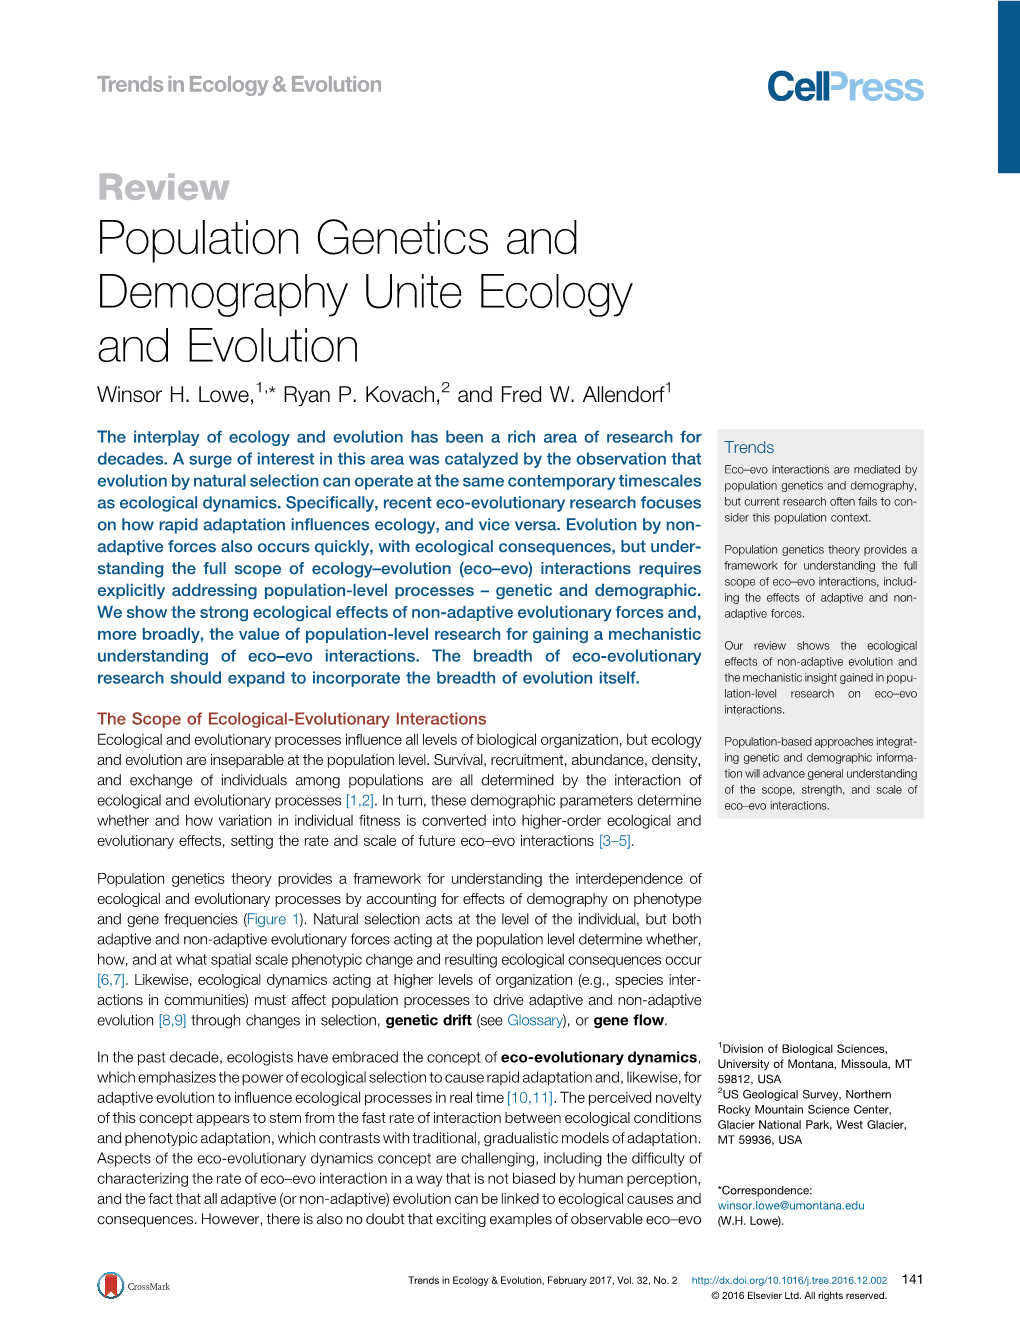 Population Genetics and Demography Unite Ecology and Evolution